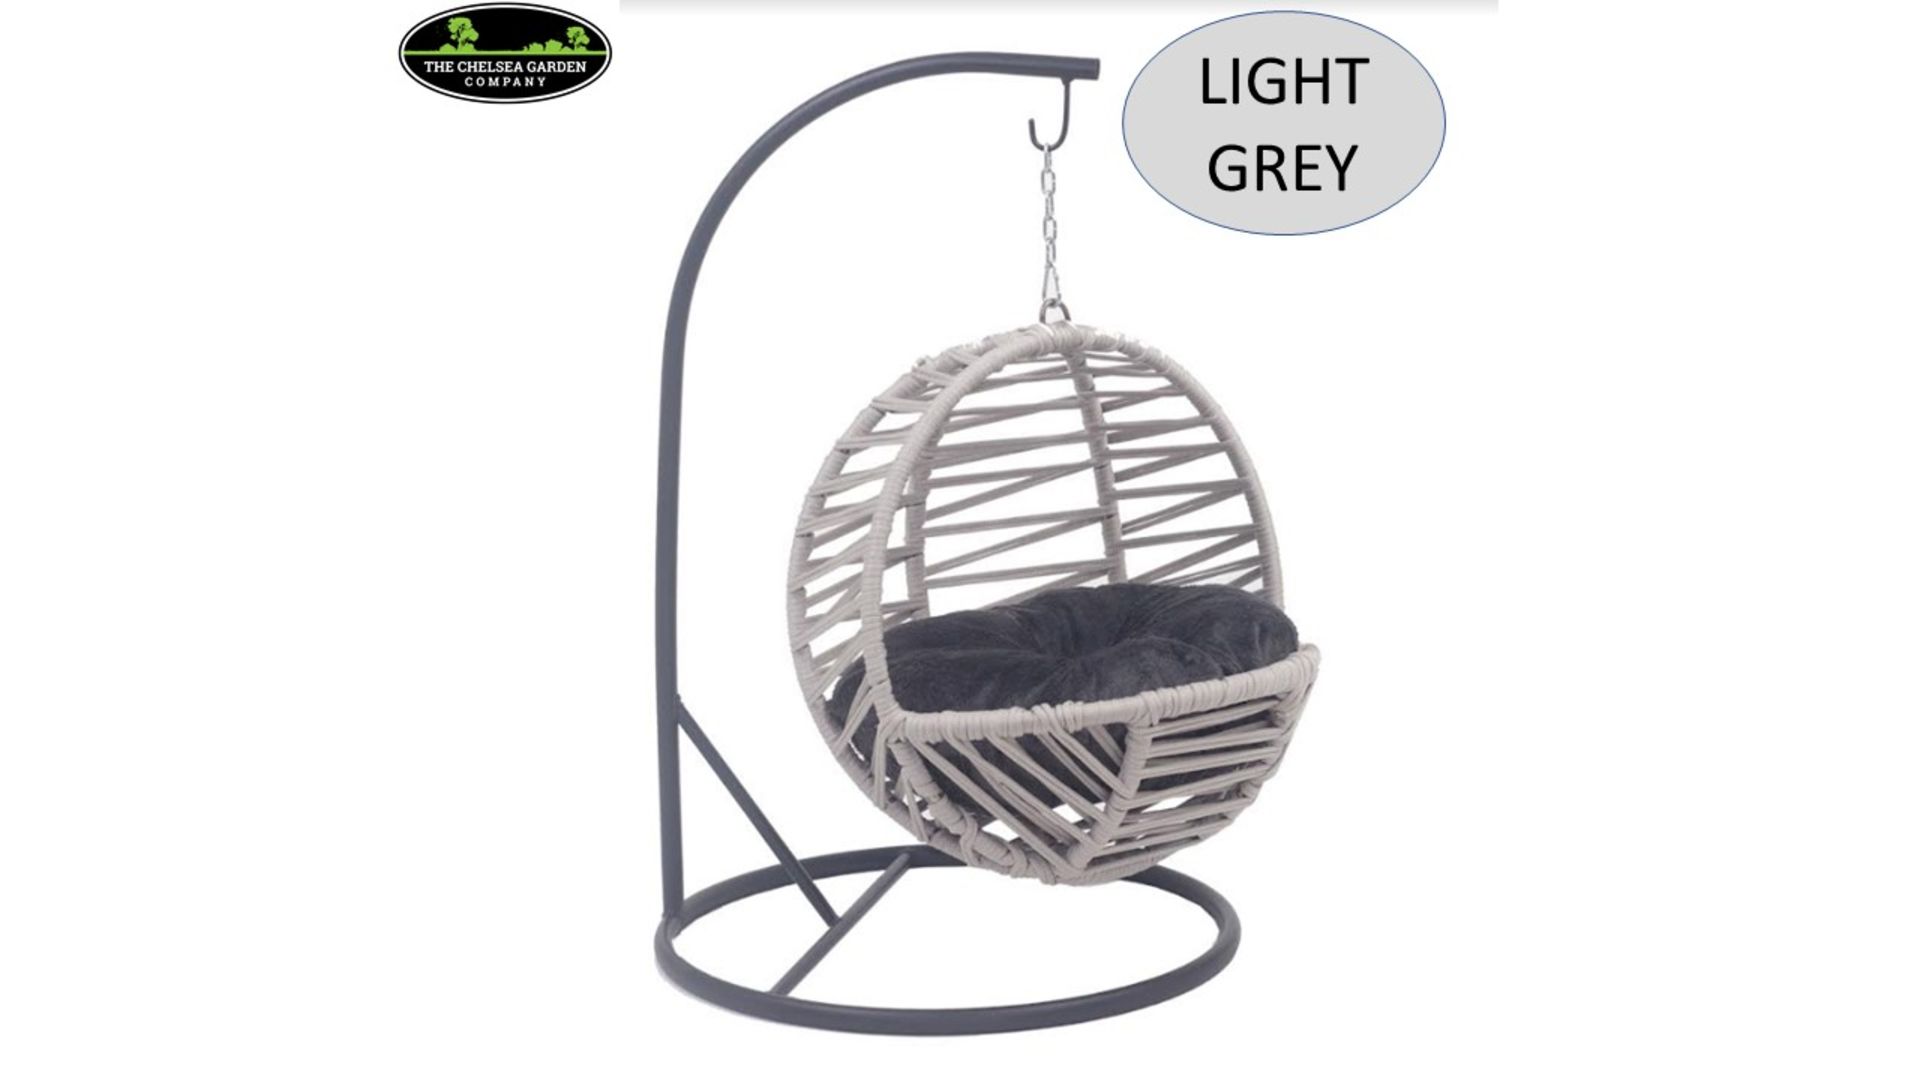 + VAT Brand New Chelsea Garden Company Cat Egg Chair - Light Grey - Item Available Approx 28 Days